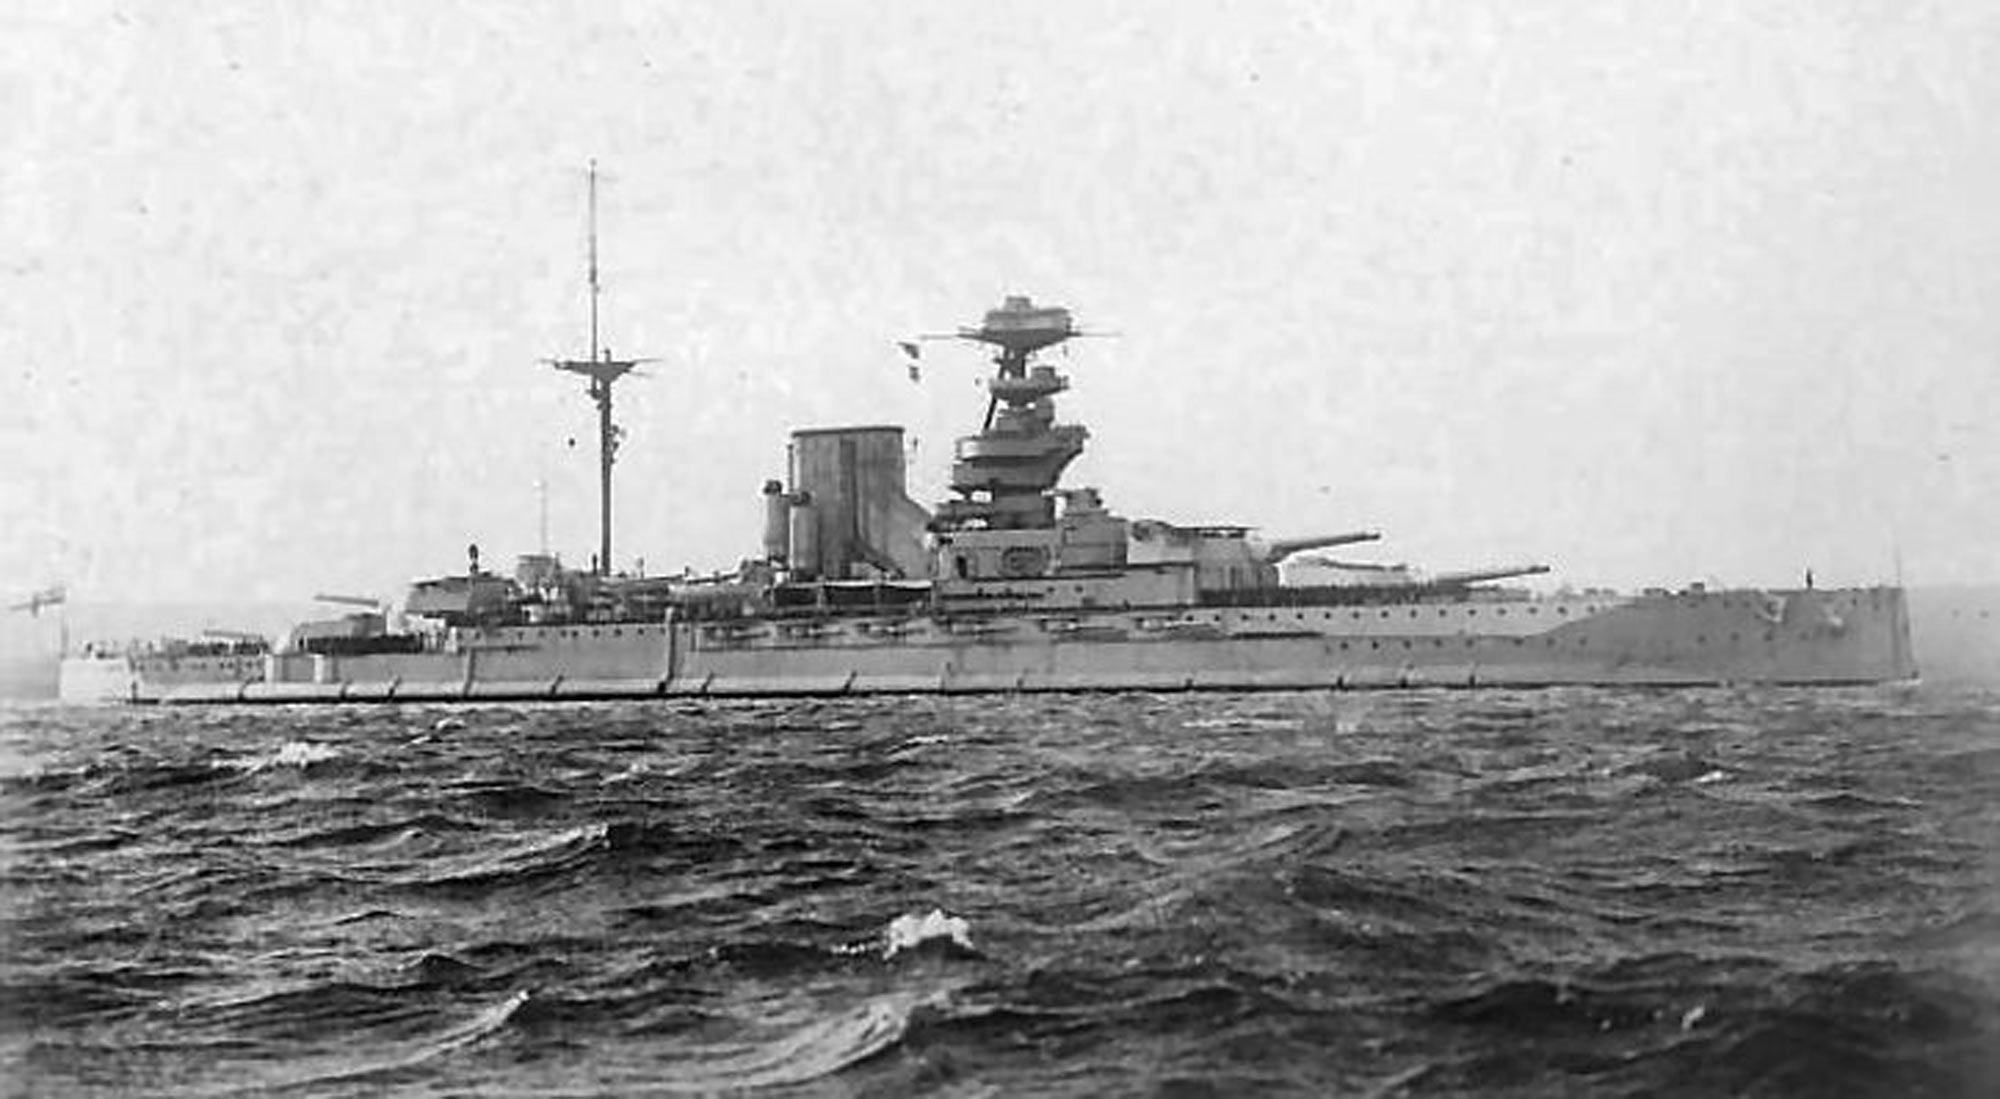  Battleship HMS Malaya commanded by Captain Cuthbert Coppinger RN in 1941